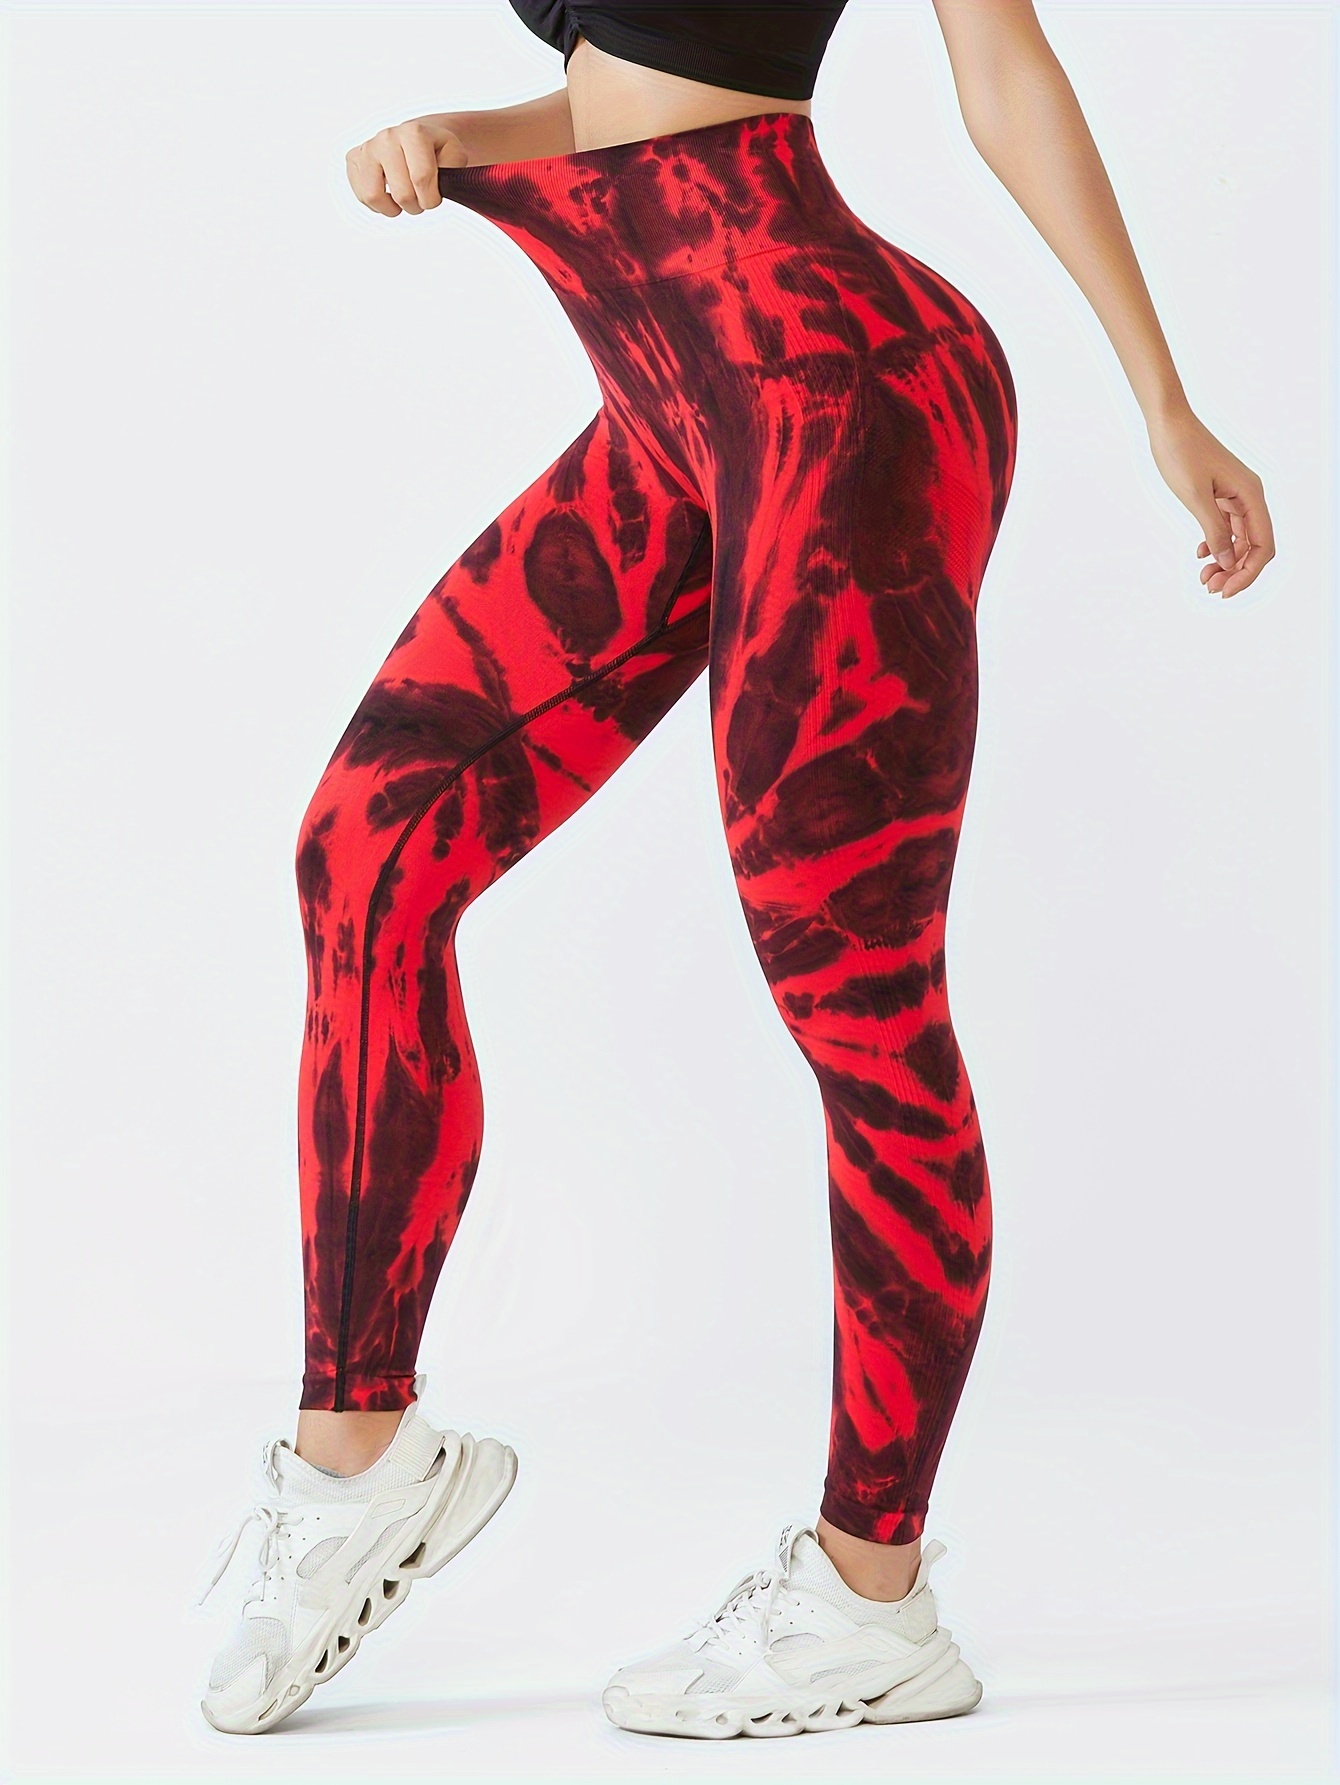 Black and Red Ombre Yoga Leggings, Gradient Women Girls Workout Half Dip  Tie Dye Workout Pants Printed Sexy Plus Size Festival Tights -  Canada